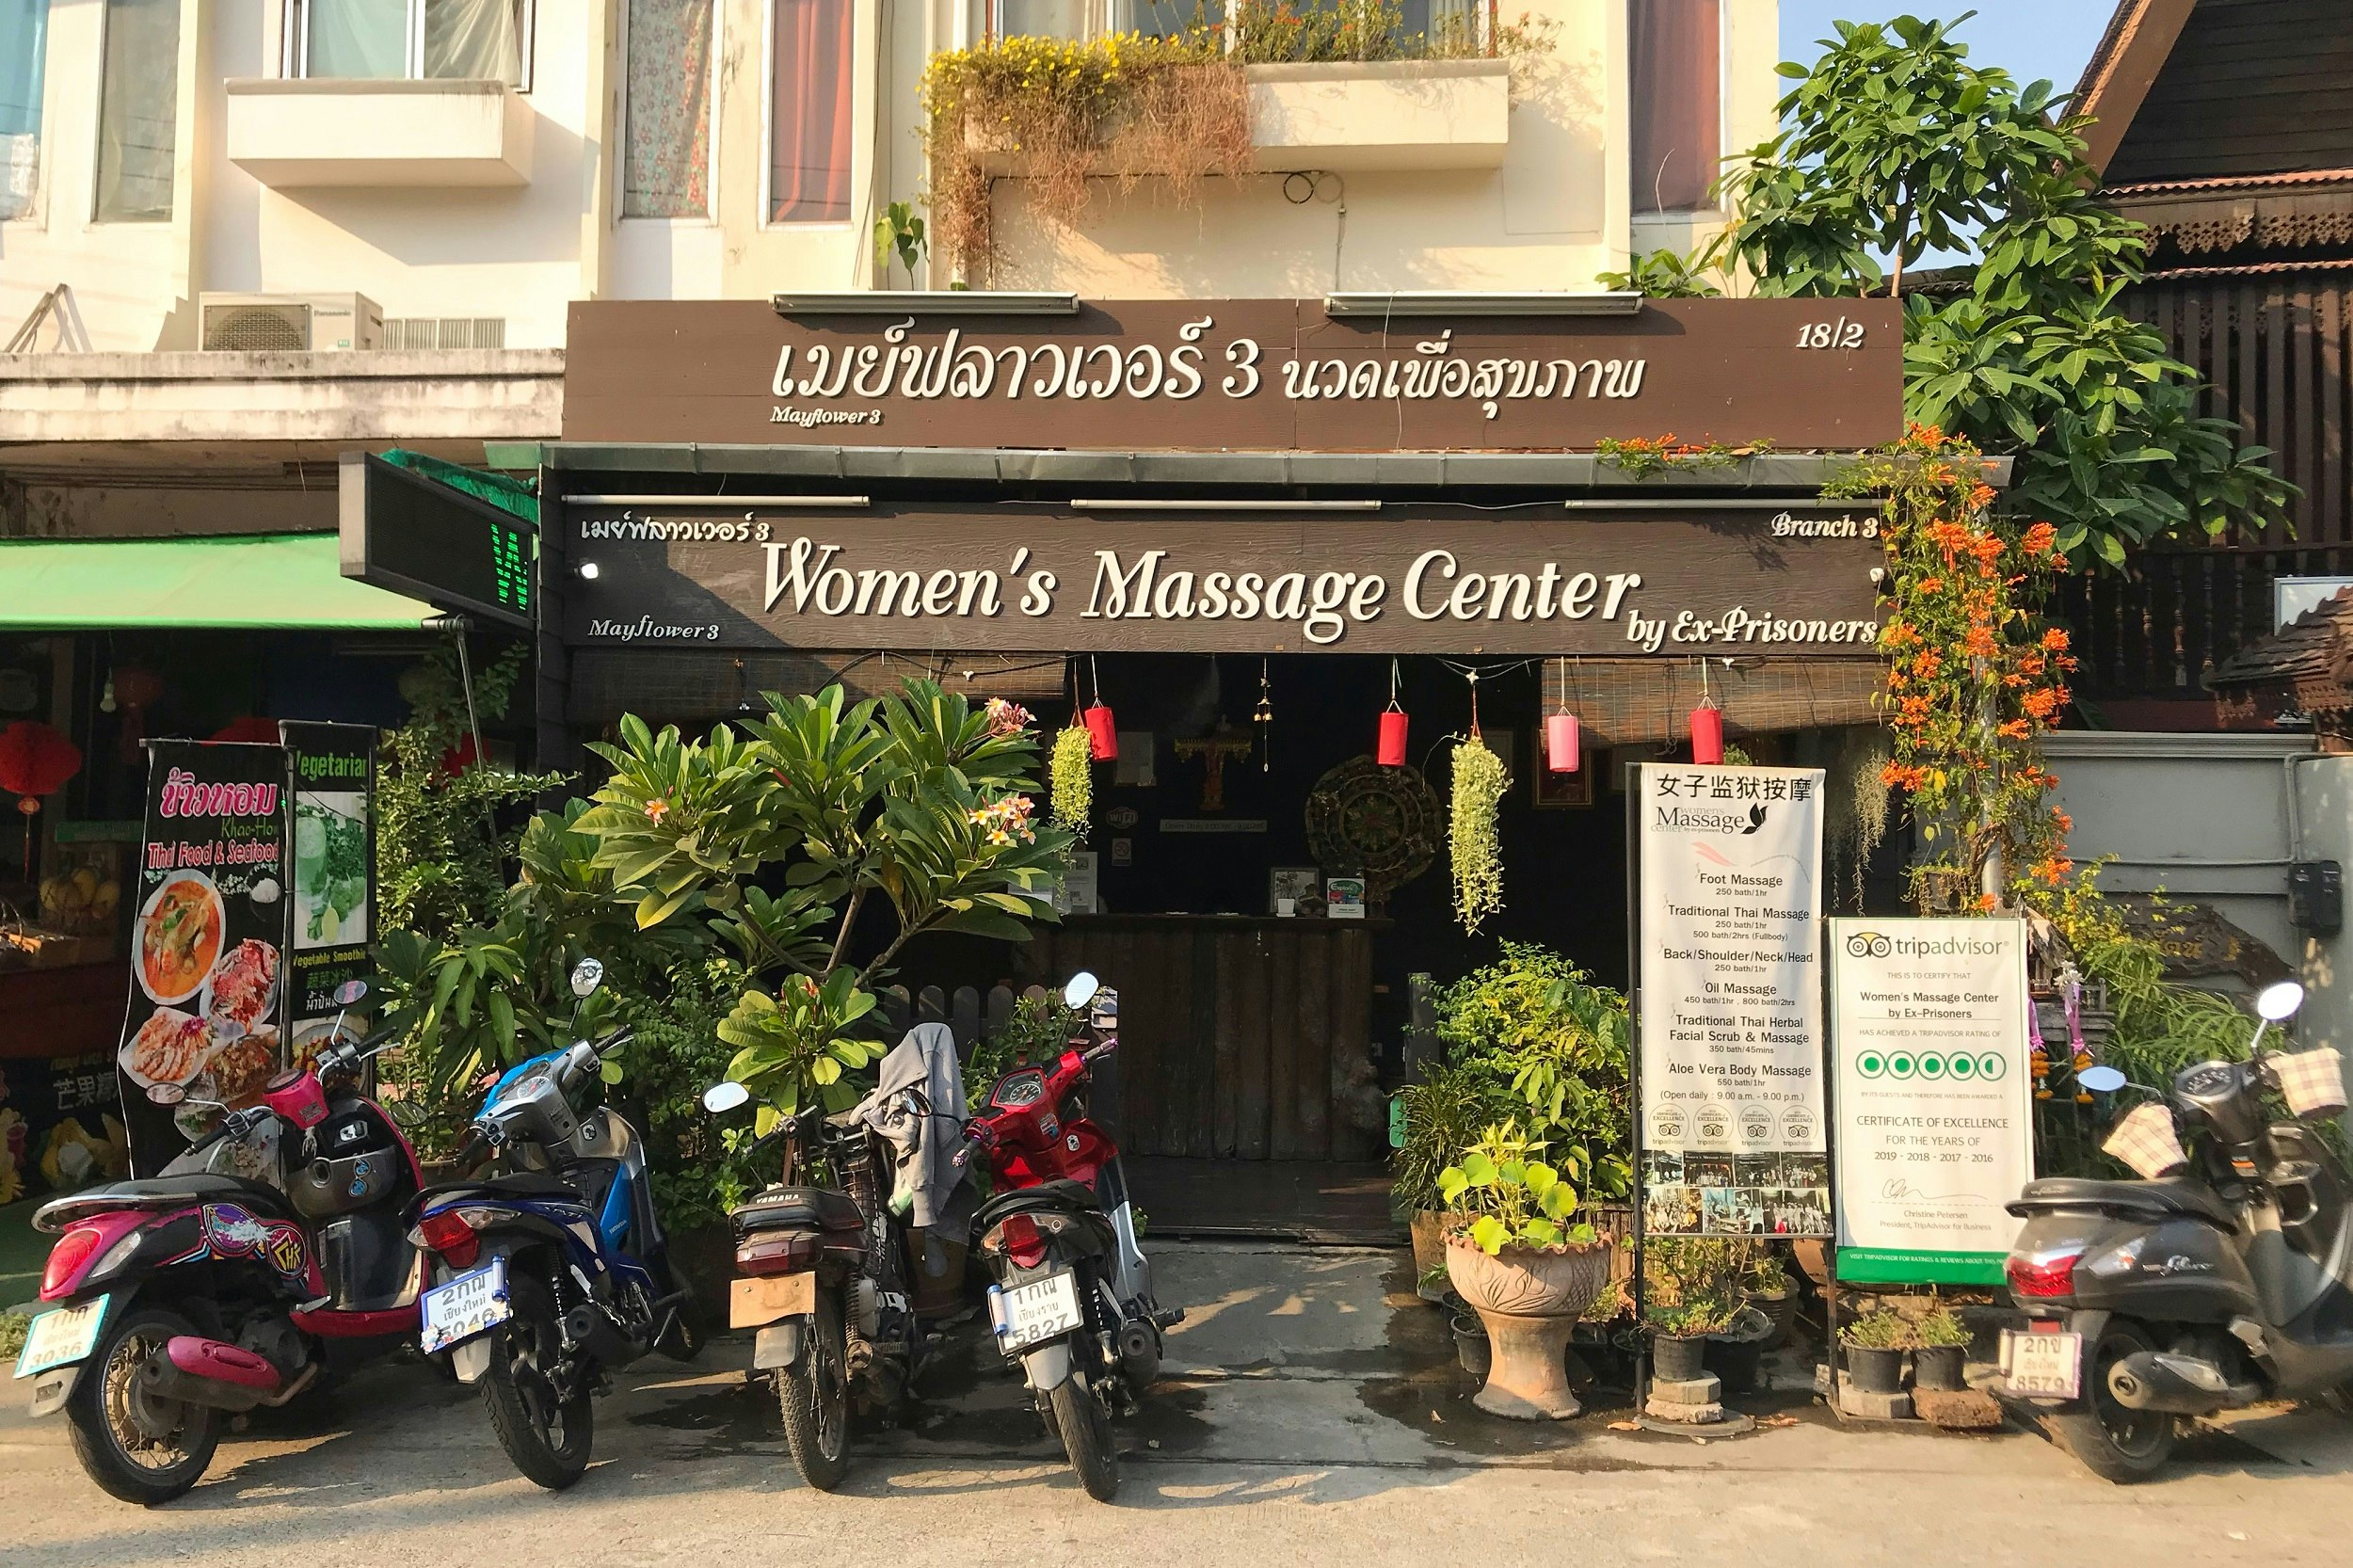 Front of a shop with a large sign in Thai and English that says "Women's Massage Center by ex-prisoners".  Five motorcycles are parked in front of the shop.